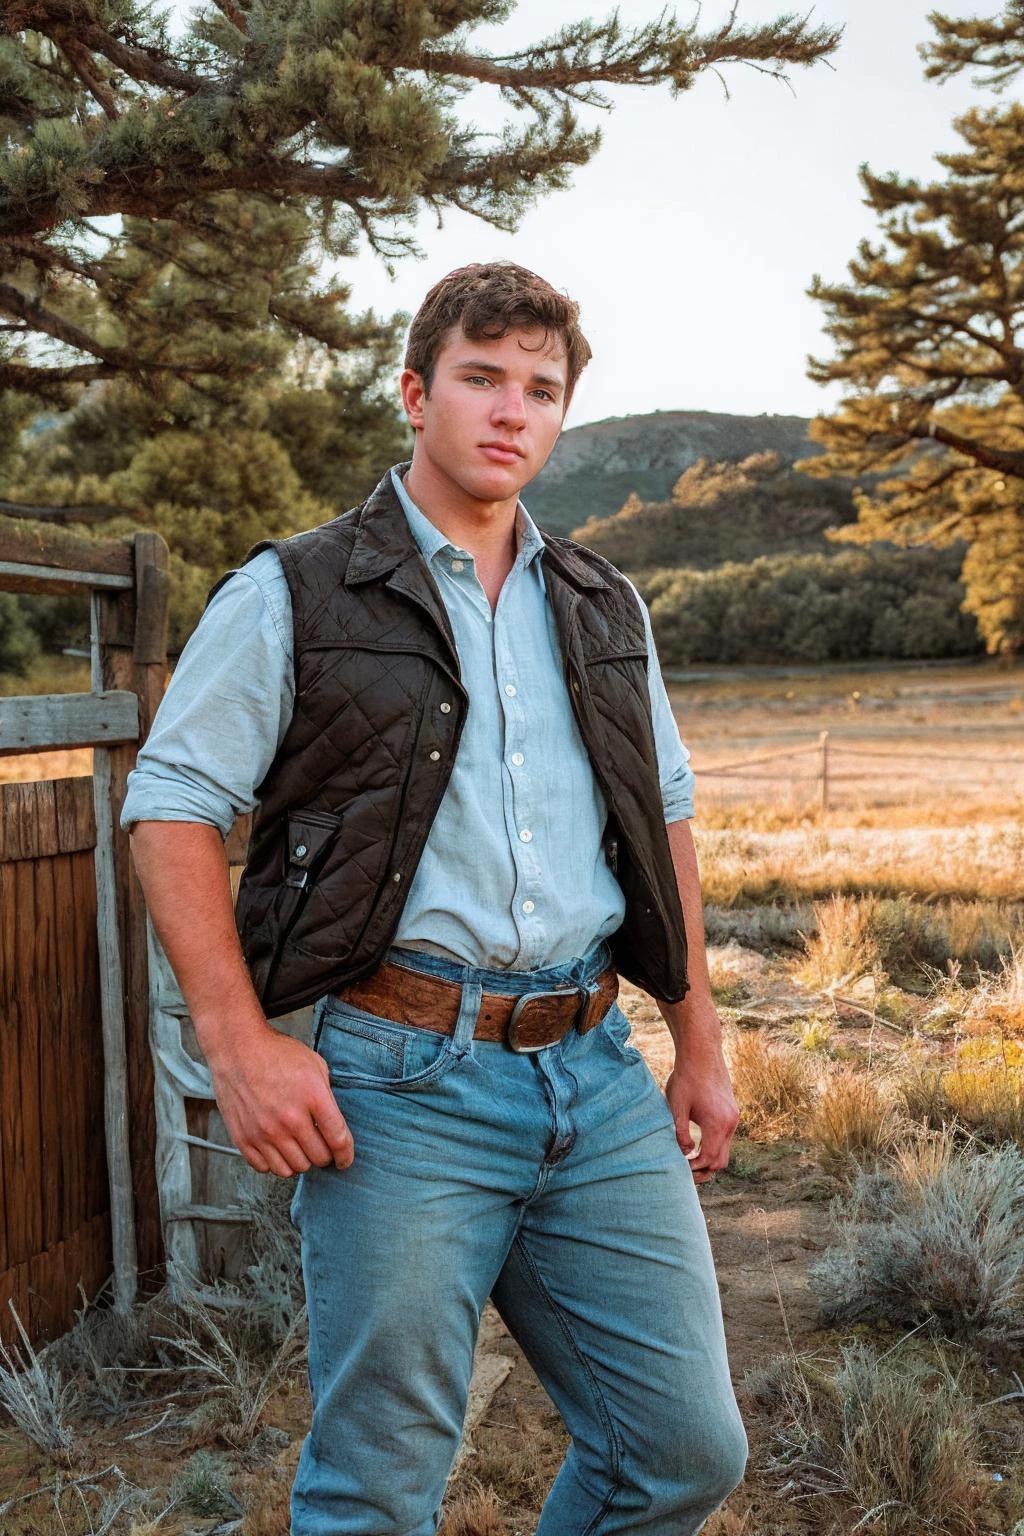 full body photo of jjperson standing on a ranch, dressed as a cowboy, shirt, vest, pants, chaps, jeans, plaid, belt, natural sunlight, rustic-aesthetic, majestic western landscape background, rustic-charm